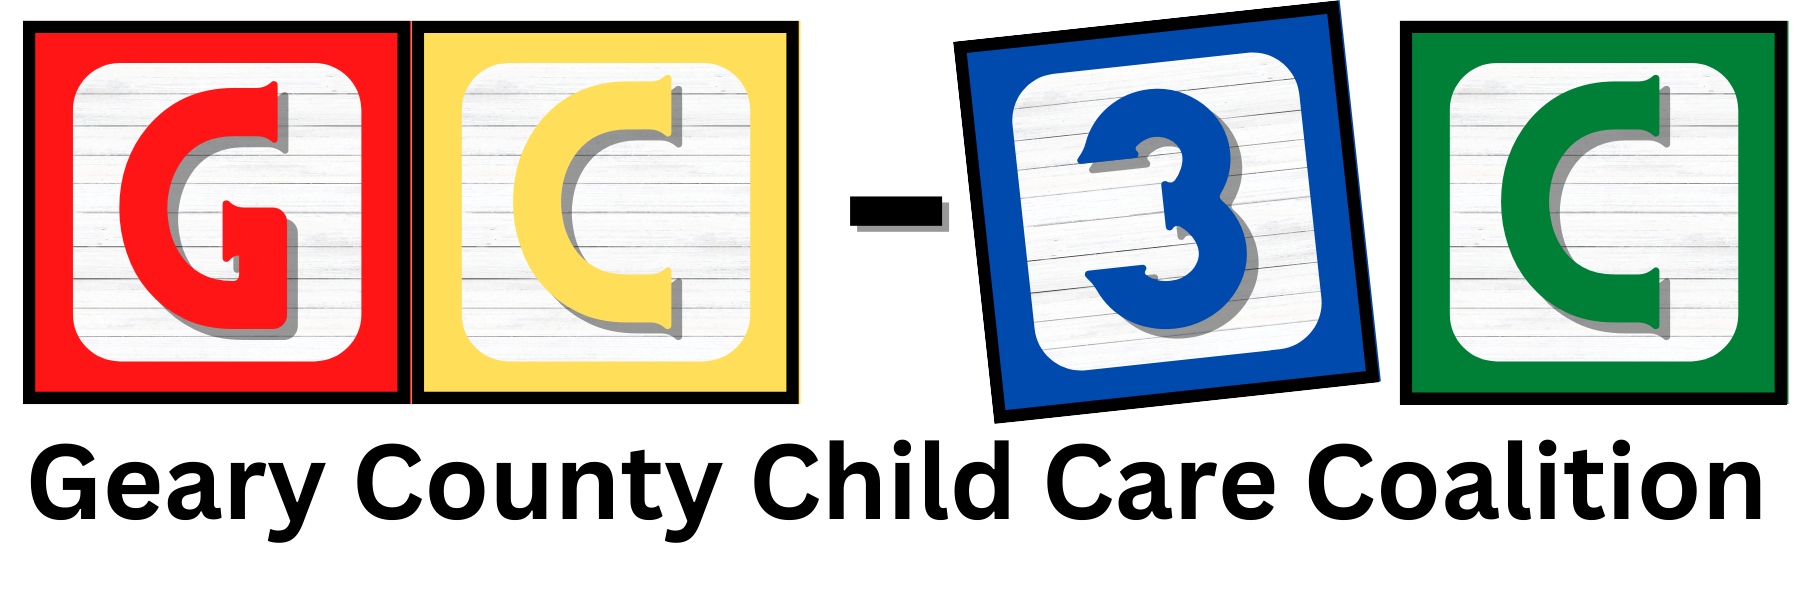 Geary County Child Care Coalition (GC3C)